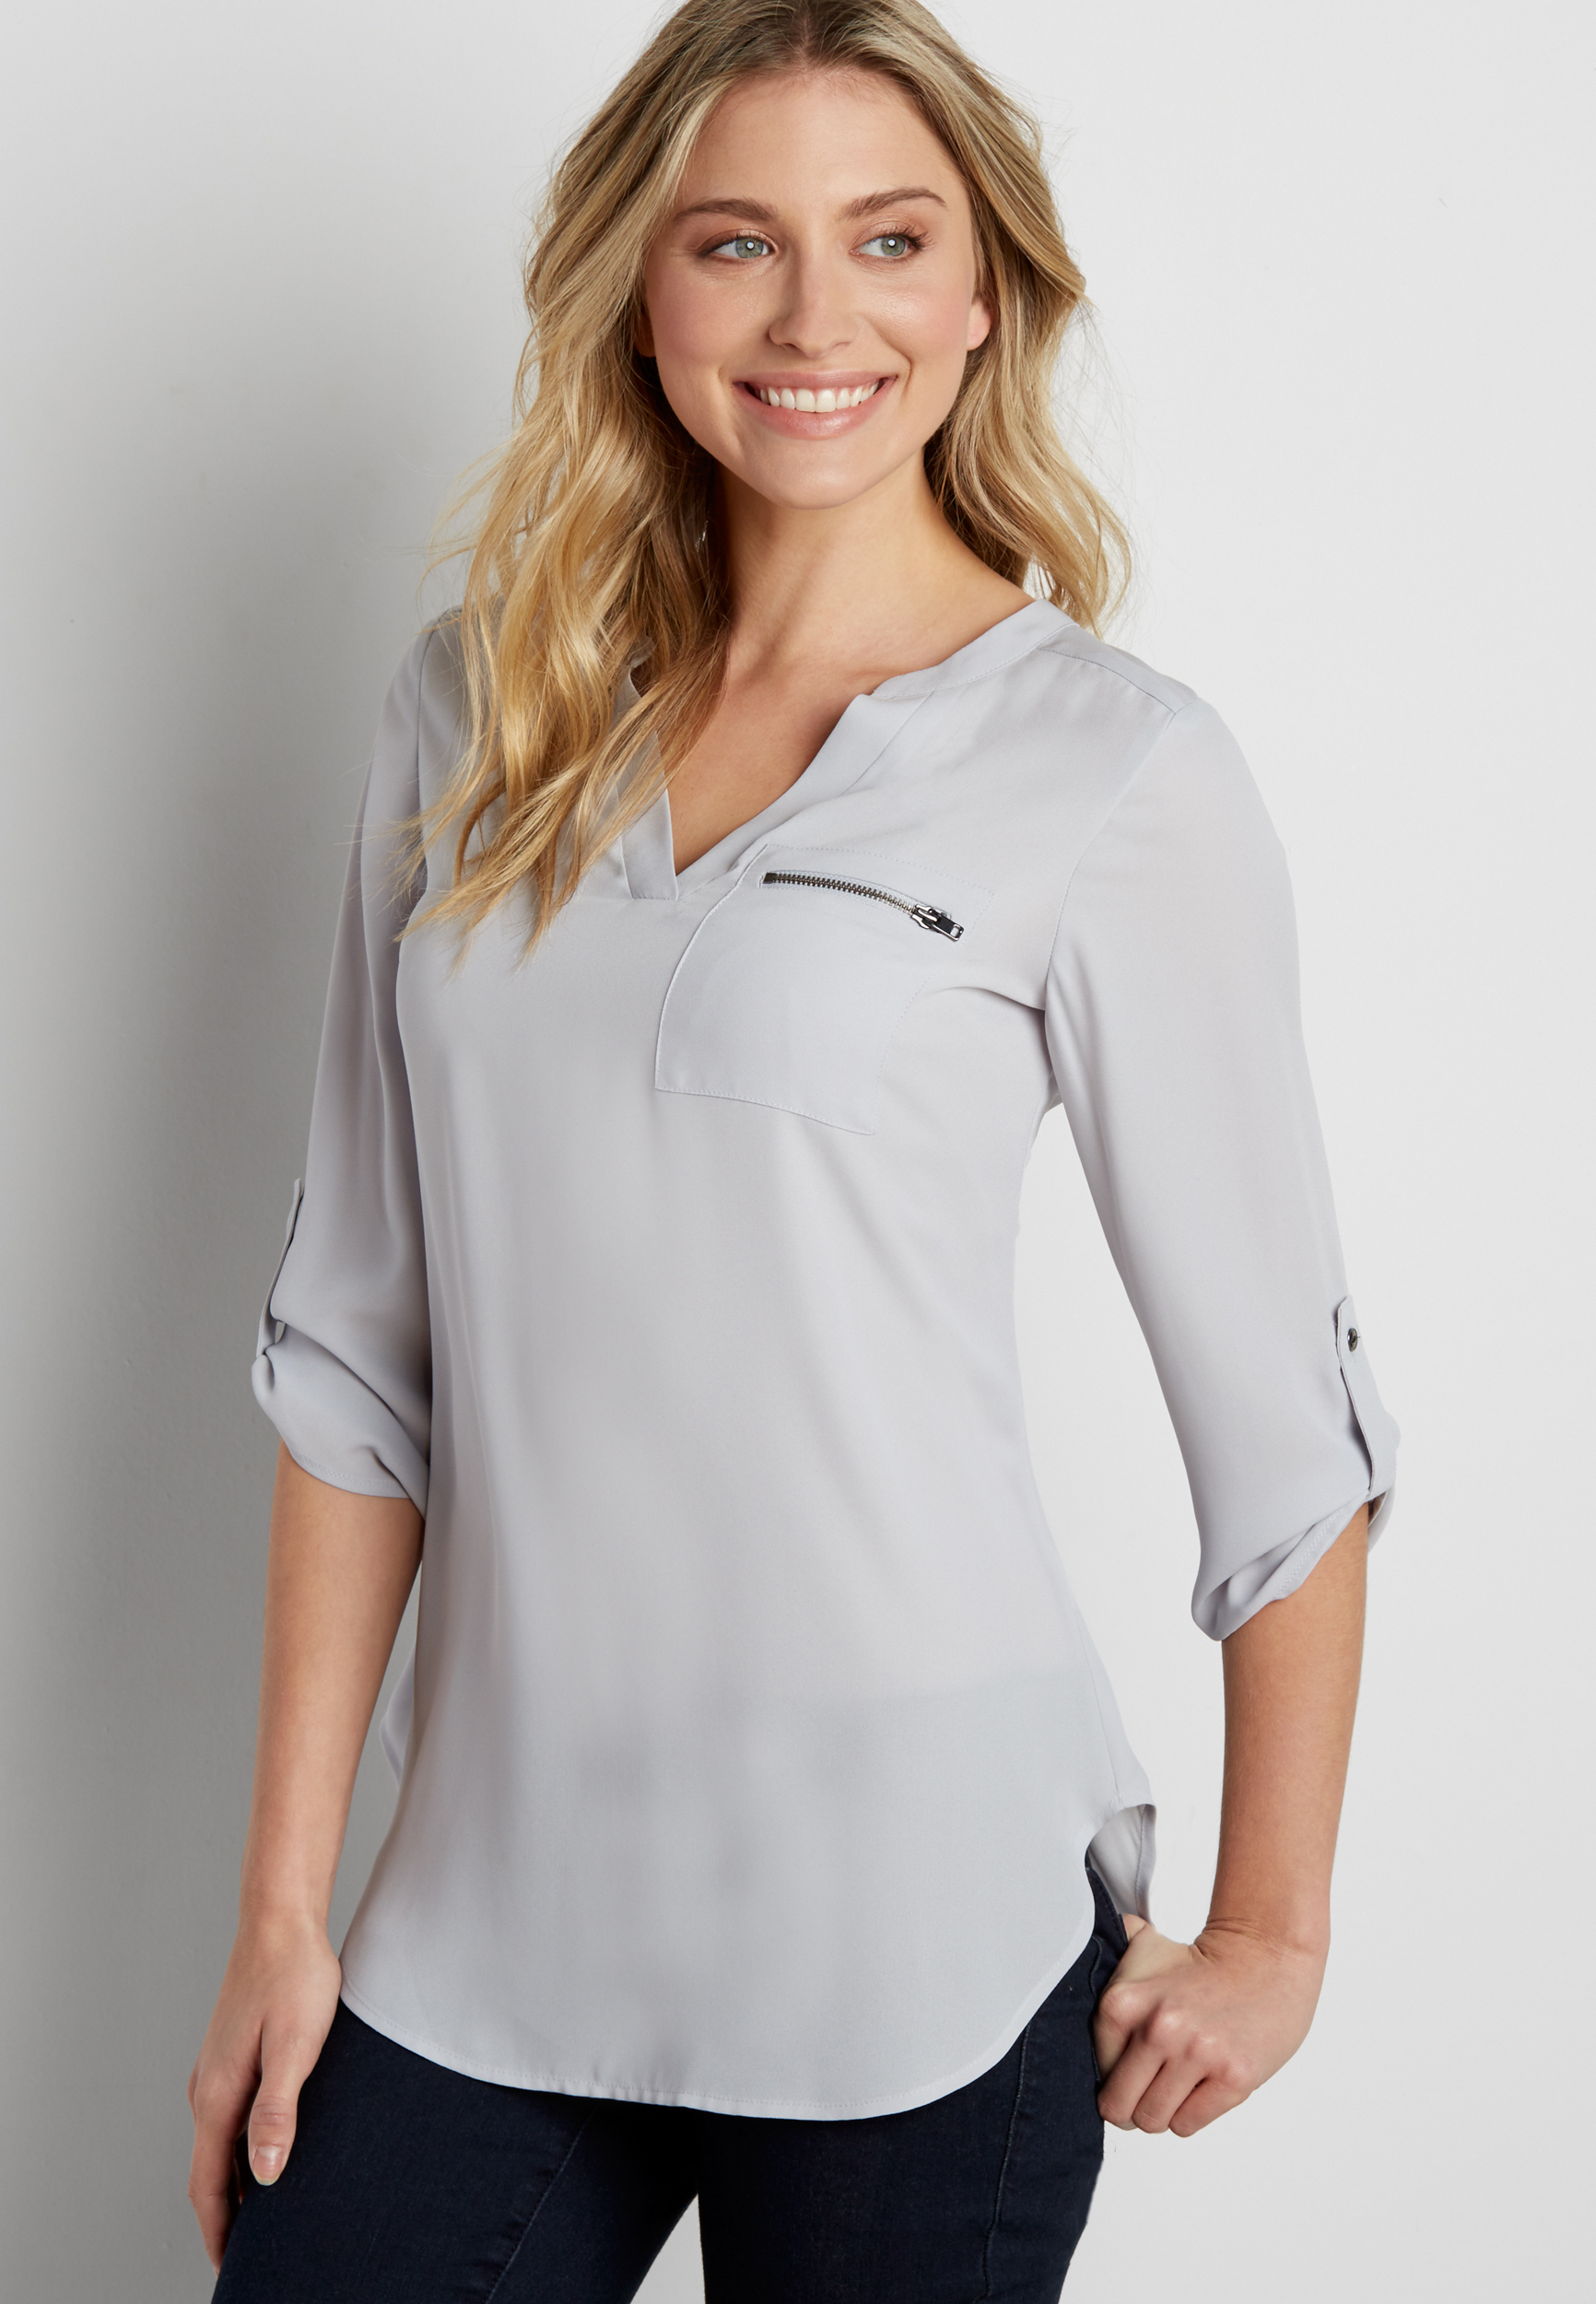 the perfect tunic blouse with zipper pocket | maurices